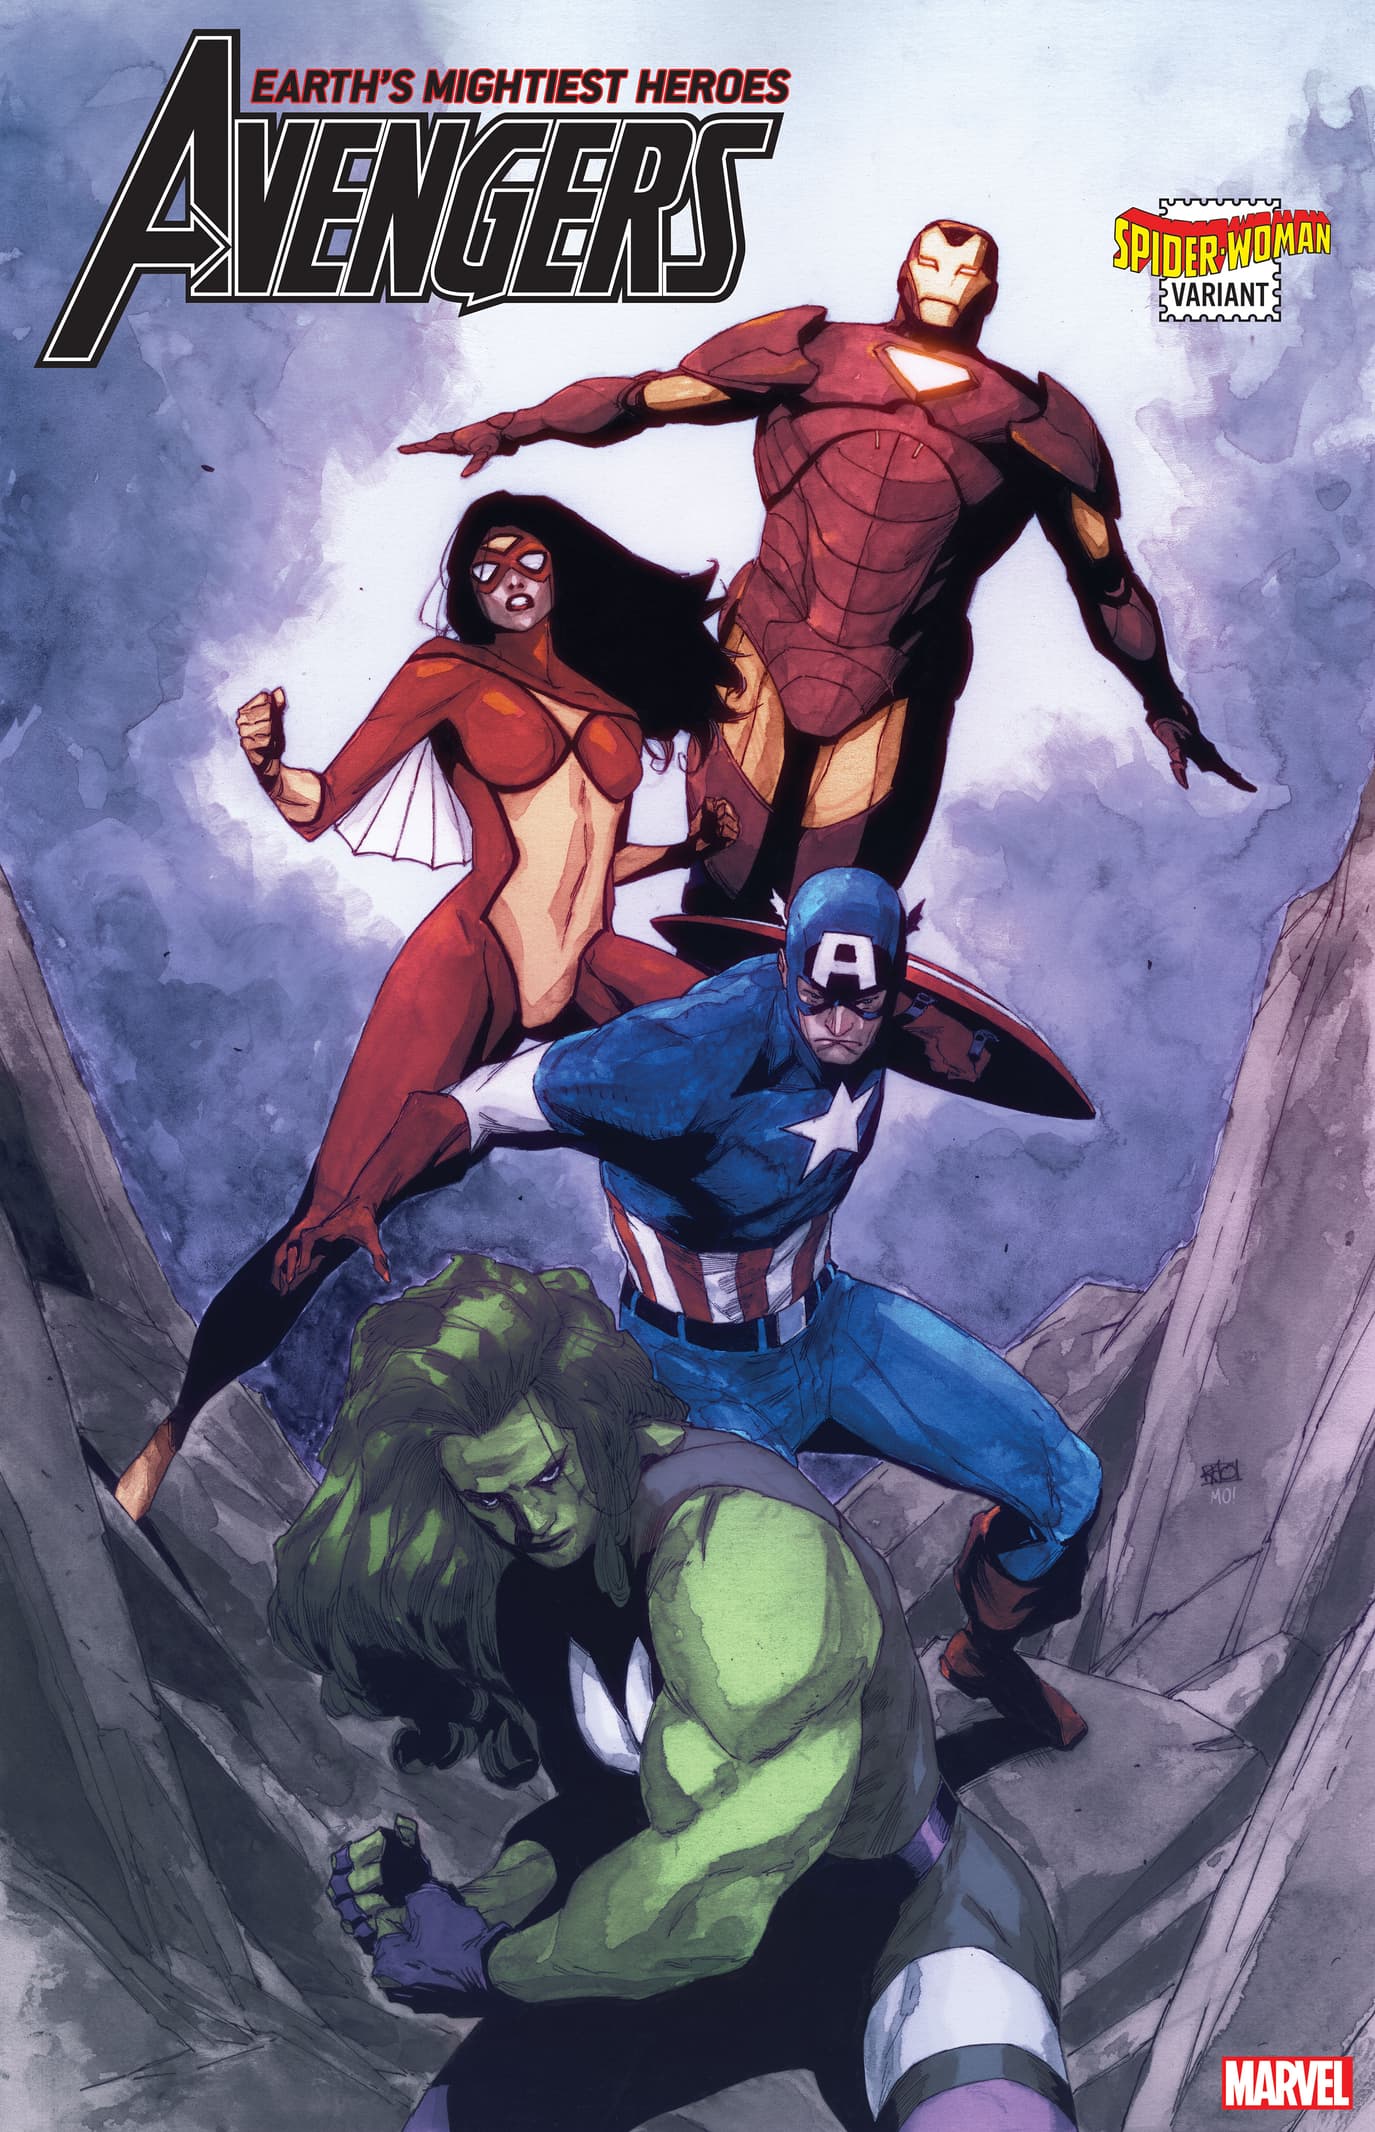 AVENGERS #33 SPIDER-WOMAN VARIANT by KHOI PHAM with colors by MORRY HOLLOWELL